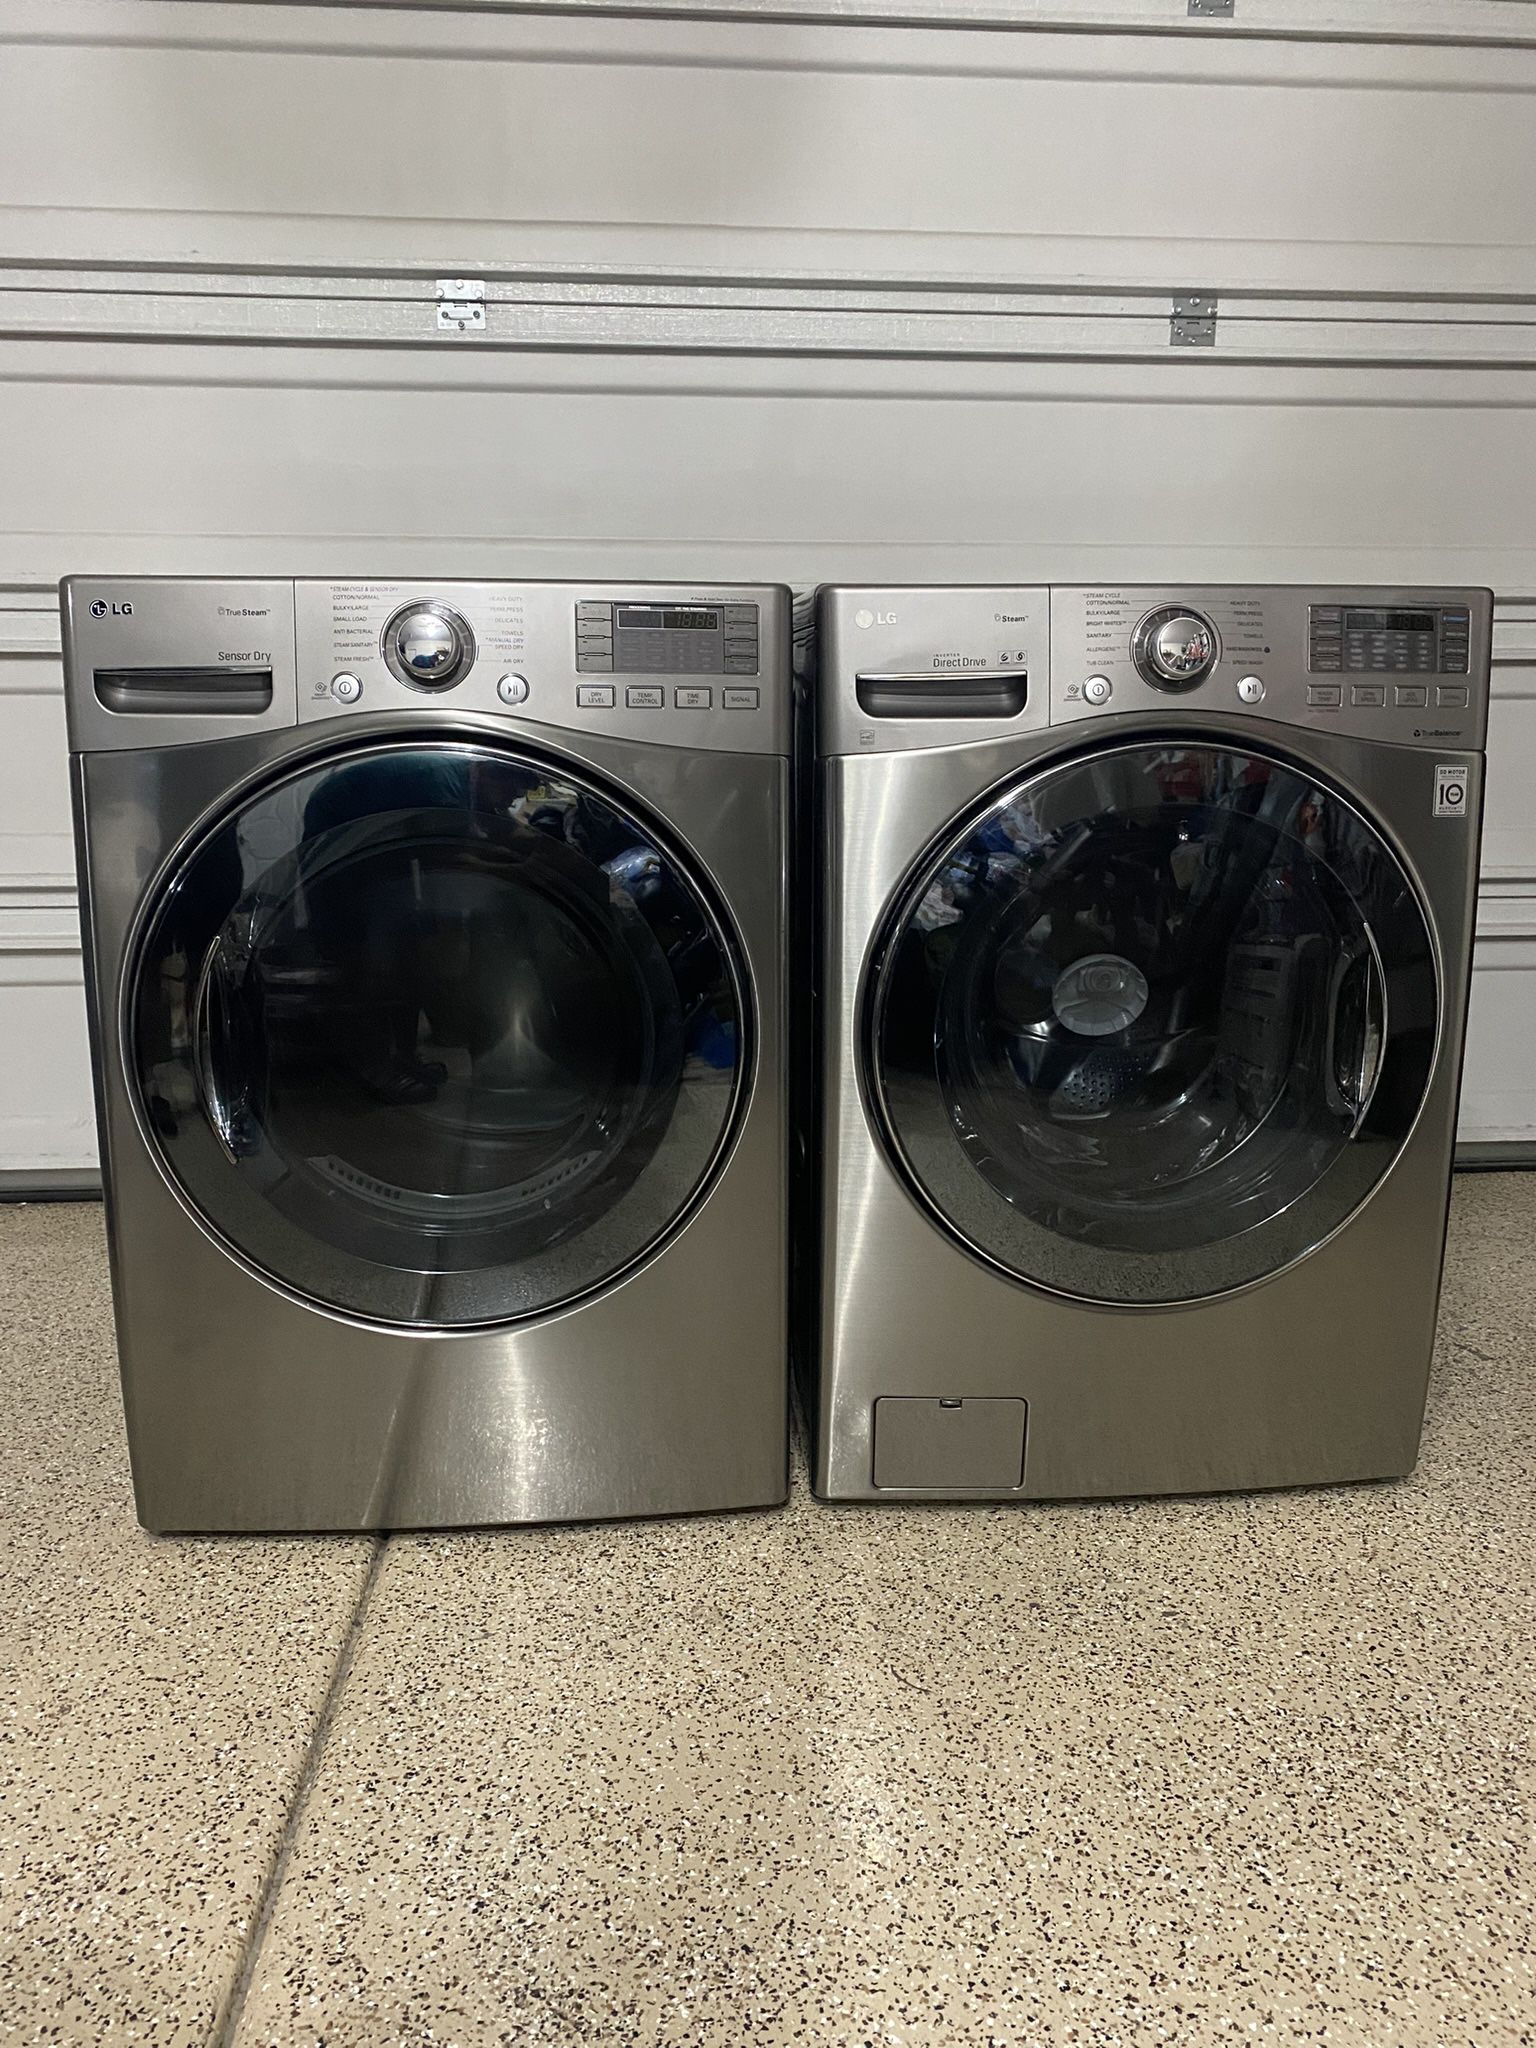 Lg Washer and Dryer Front Load Set 